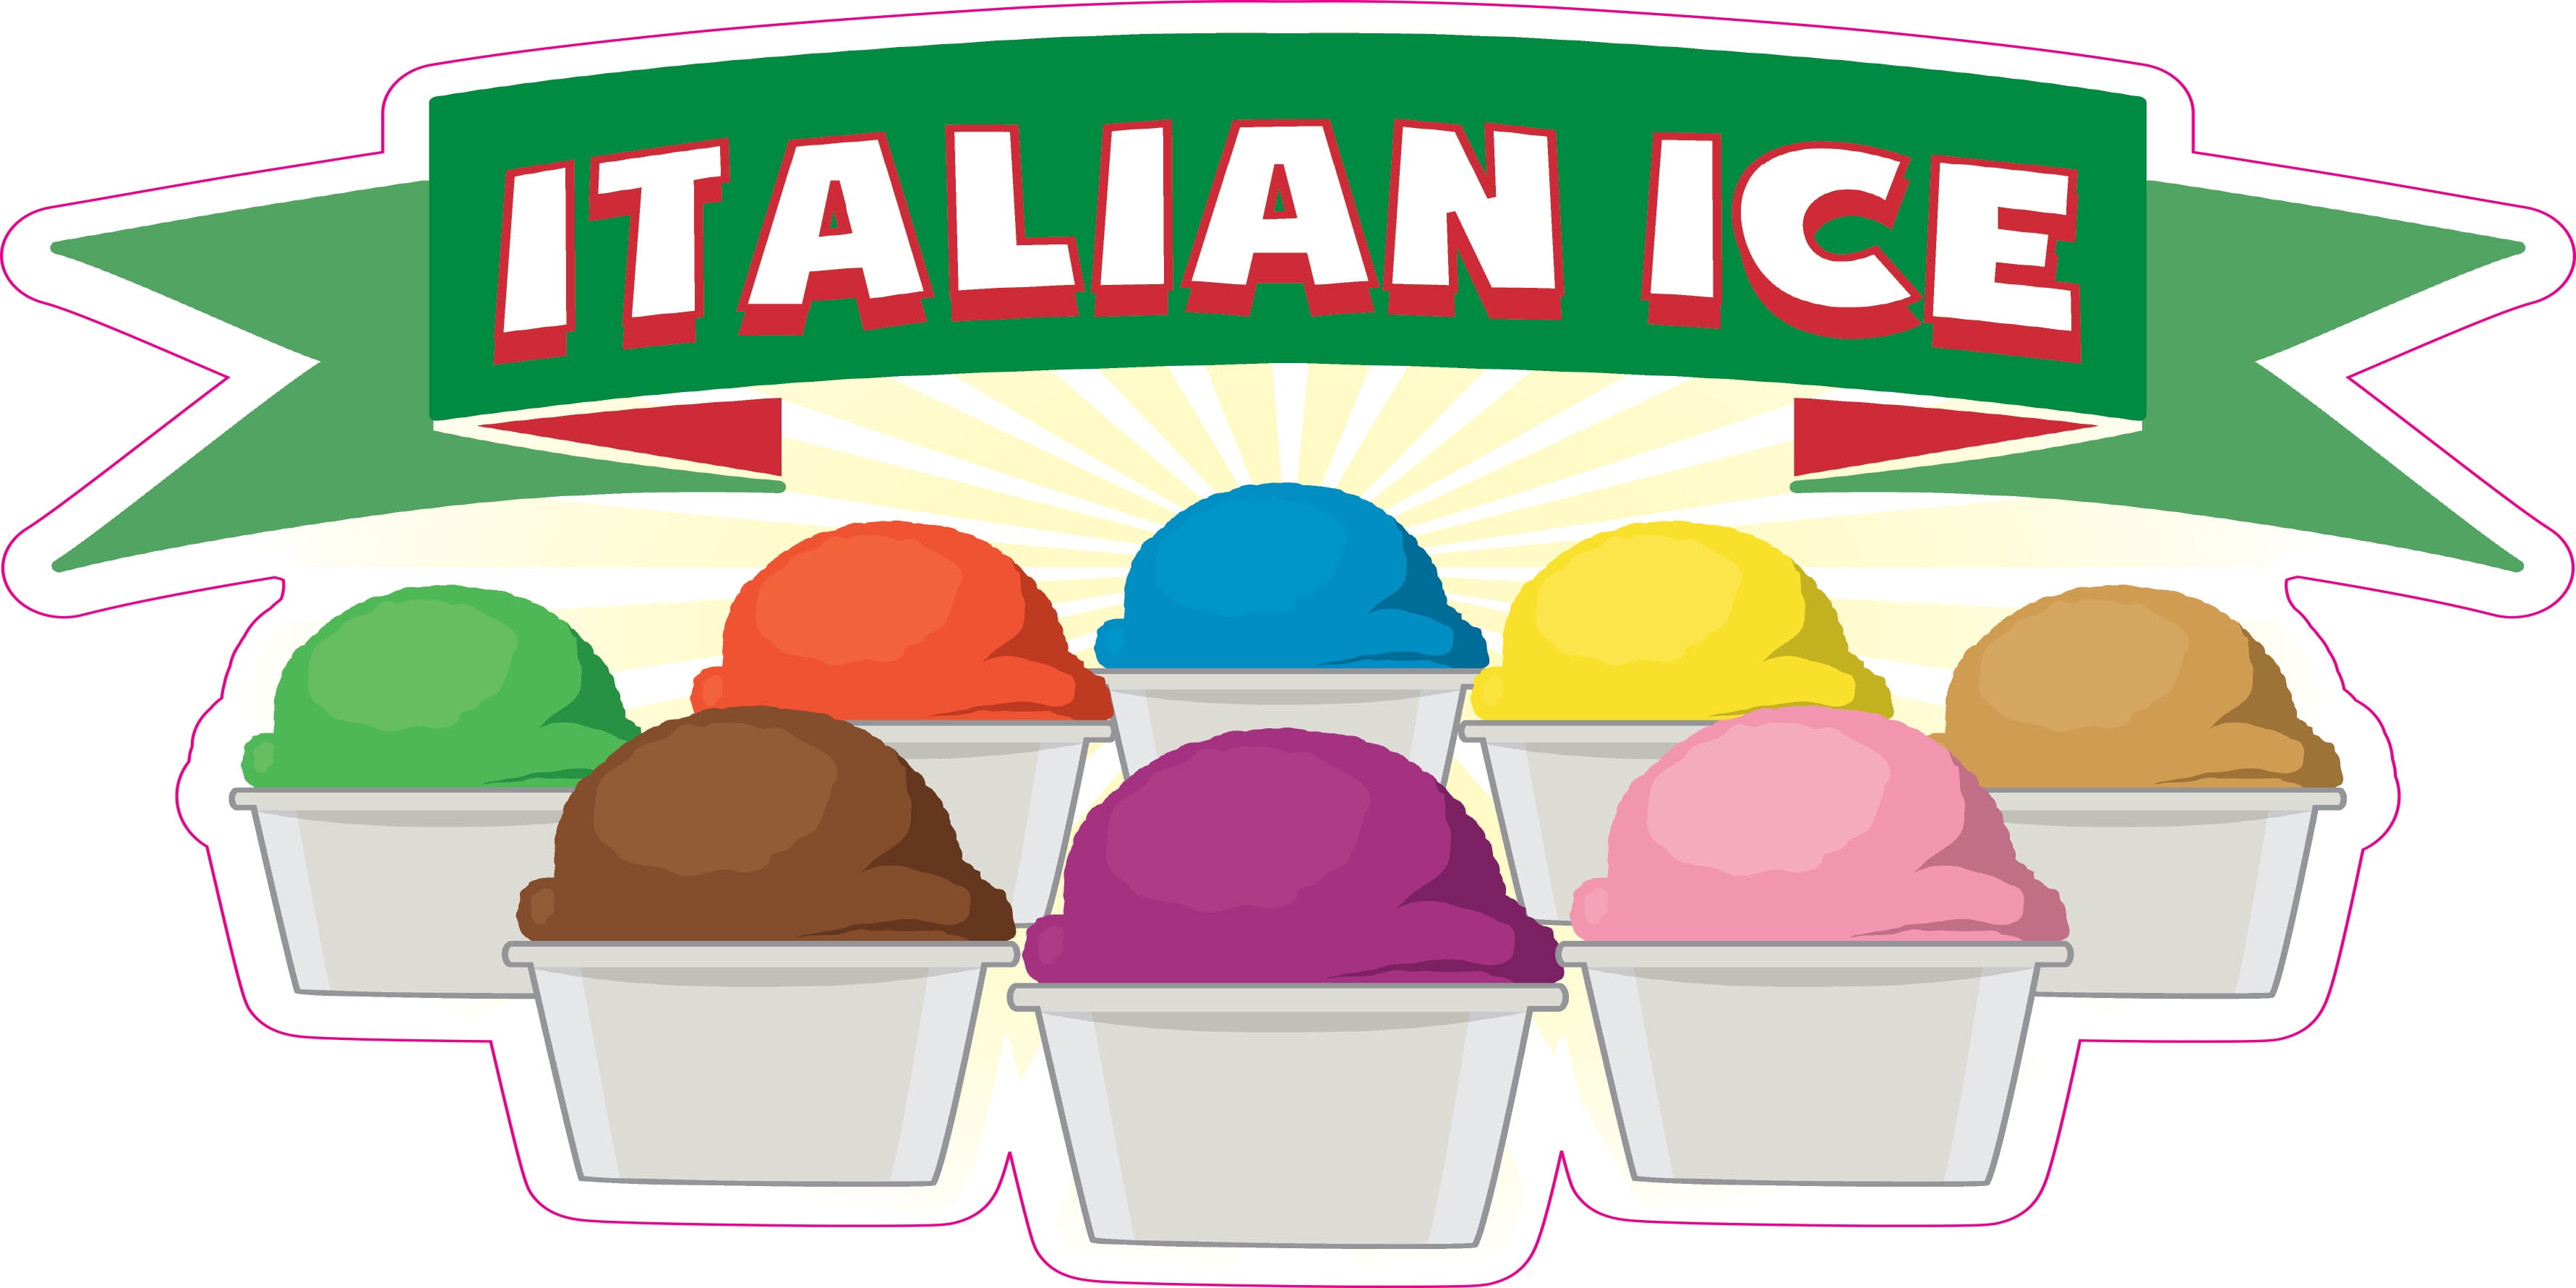 48" ITALIAN ICE Concession Decal cart trailer stand sticker equipment 